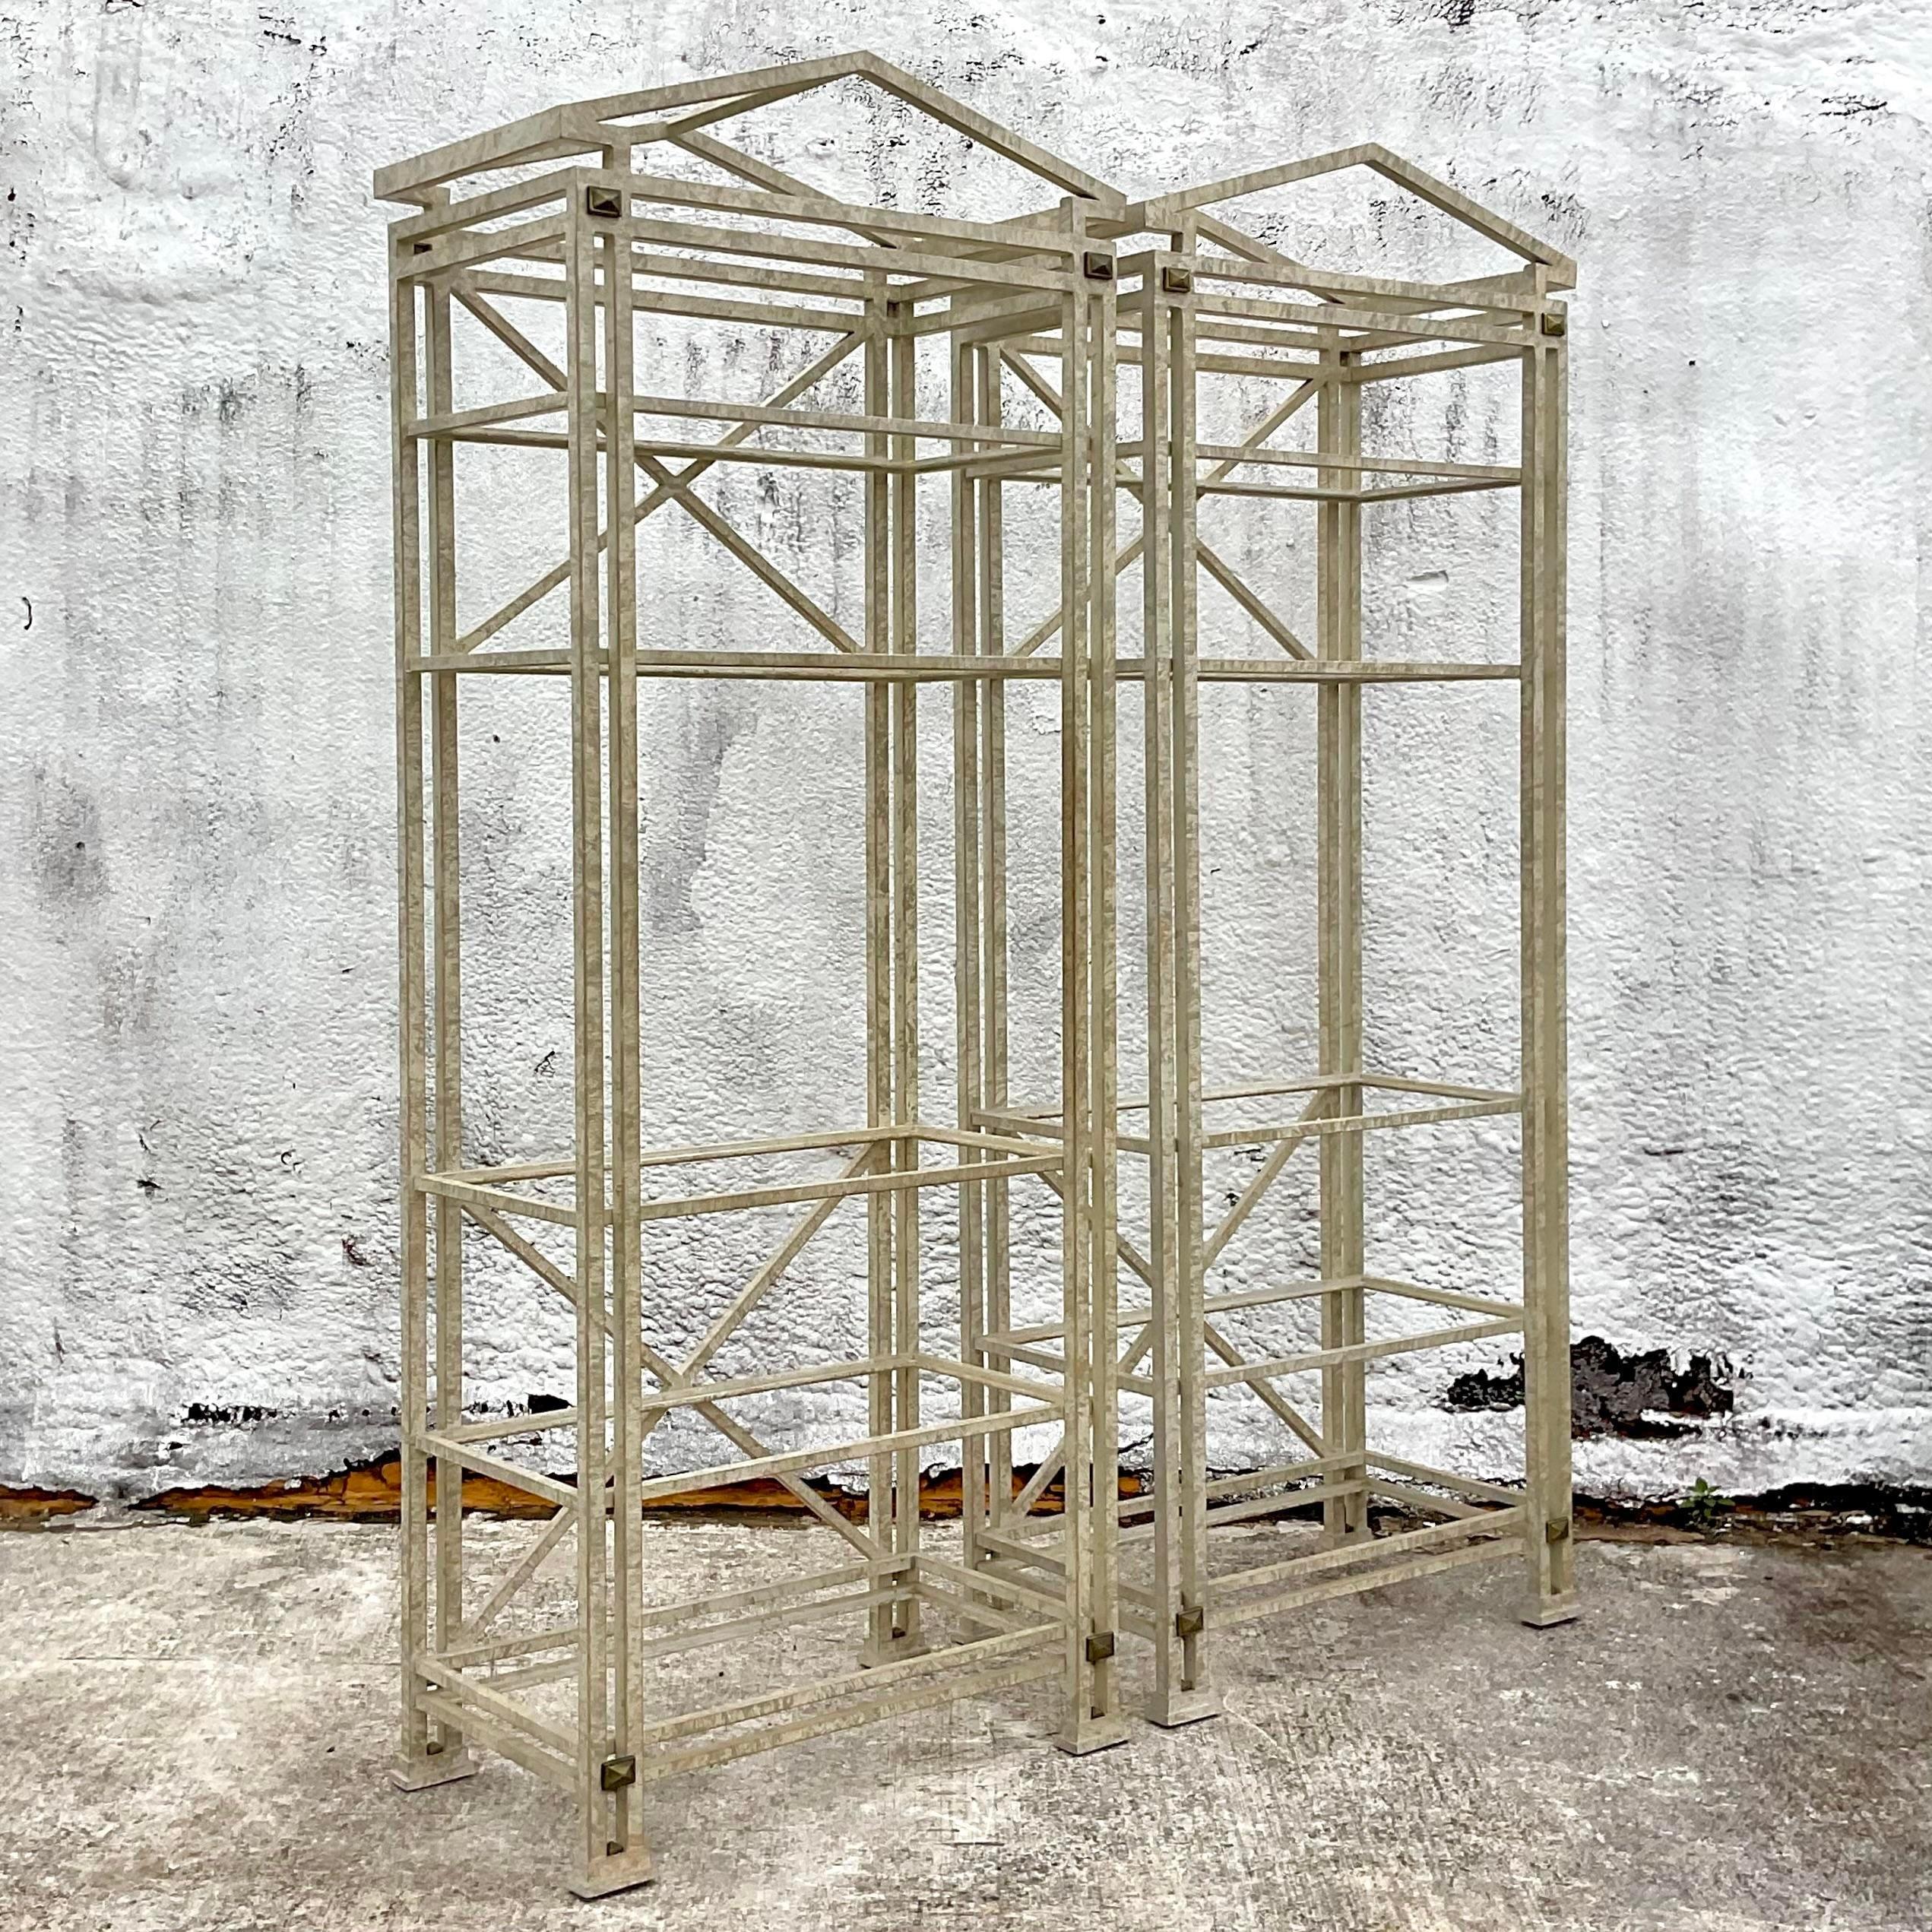 A fabulous pair of vintage Boho etagere. A chic Postmodern pediment shape. A chic painted finish over metal with Brass cap details. Perfect as is or paint them matte black for a different look. You decide! Inset glass shelves. Acquired from a Palm